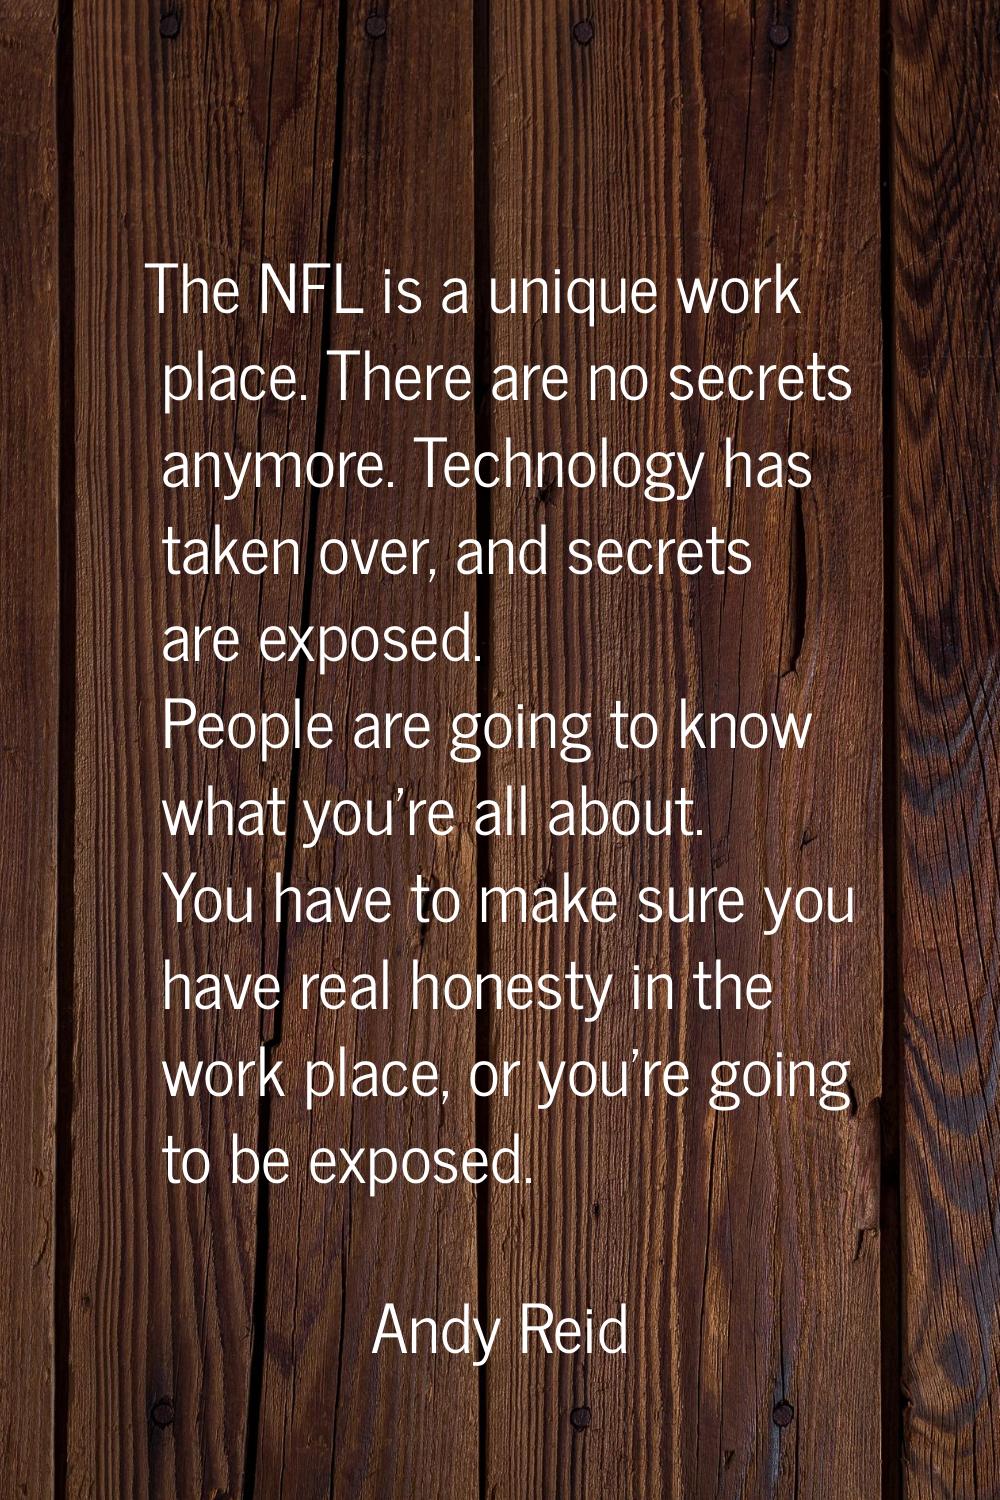 The NFL is a unique work place. There are no secrets anymore. Technology has taken over, and secret